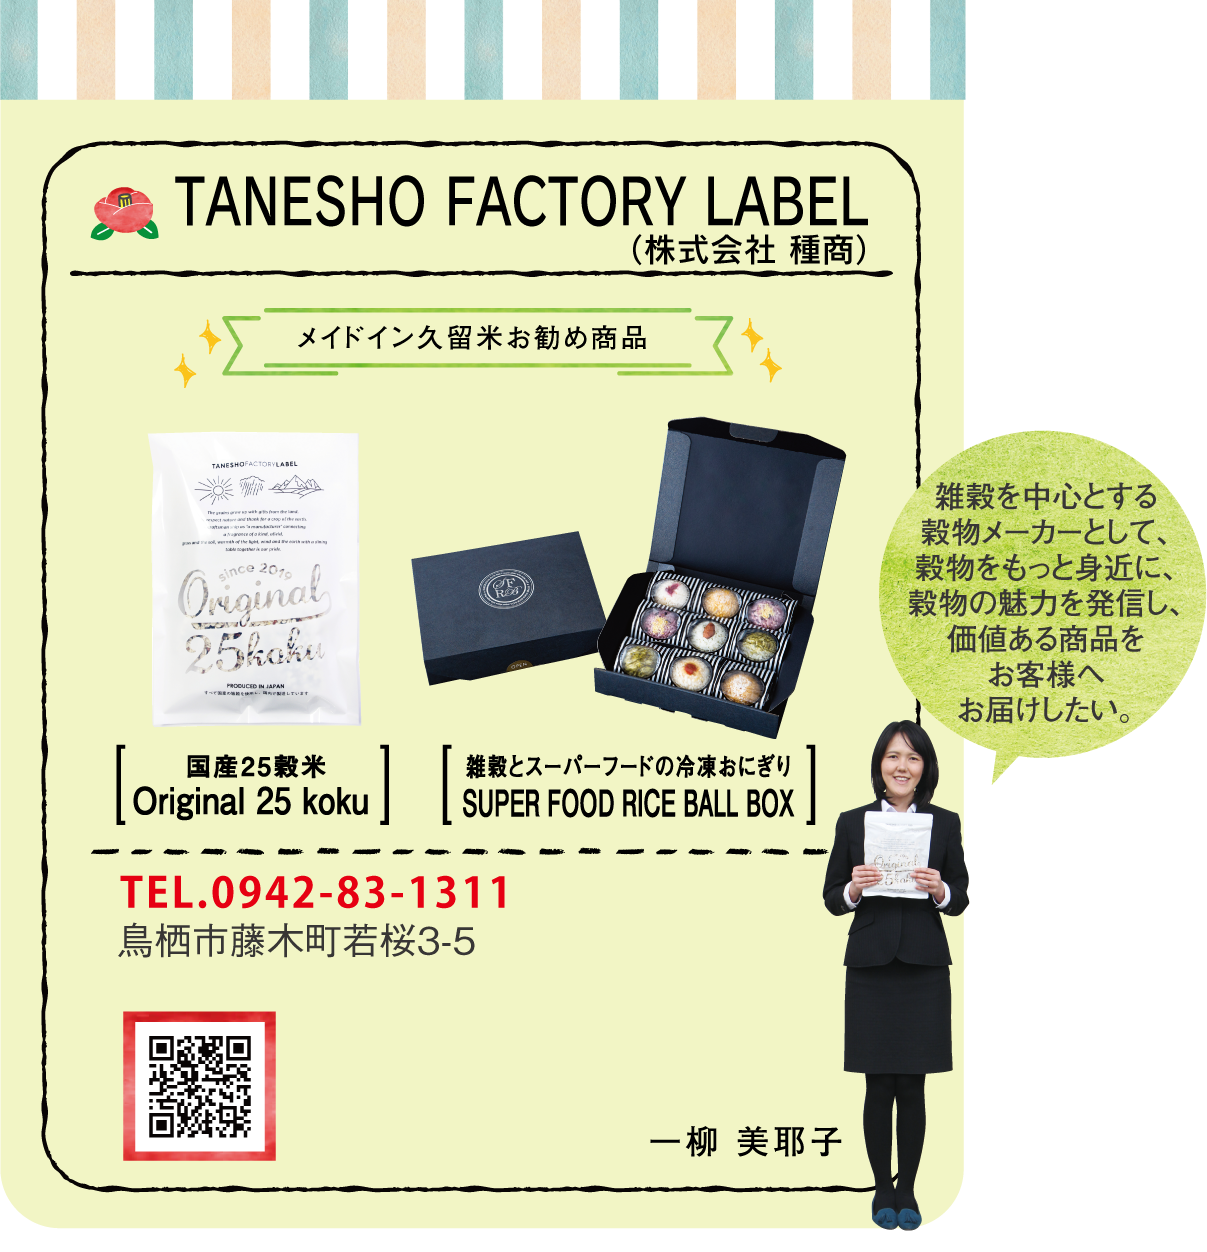 TANESHO FACTORY LABEL